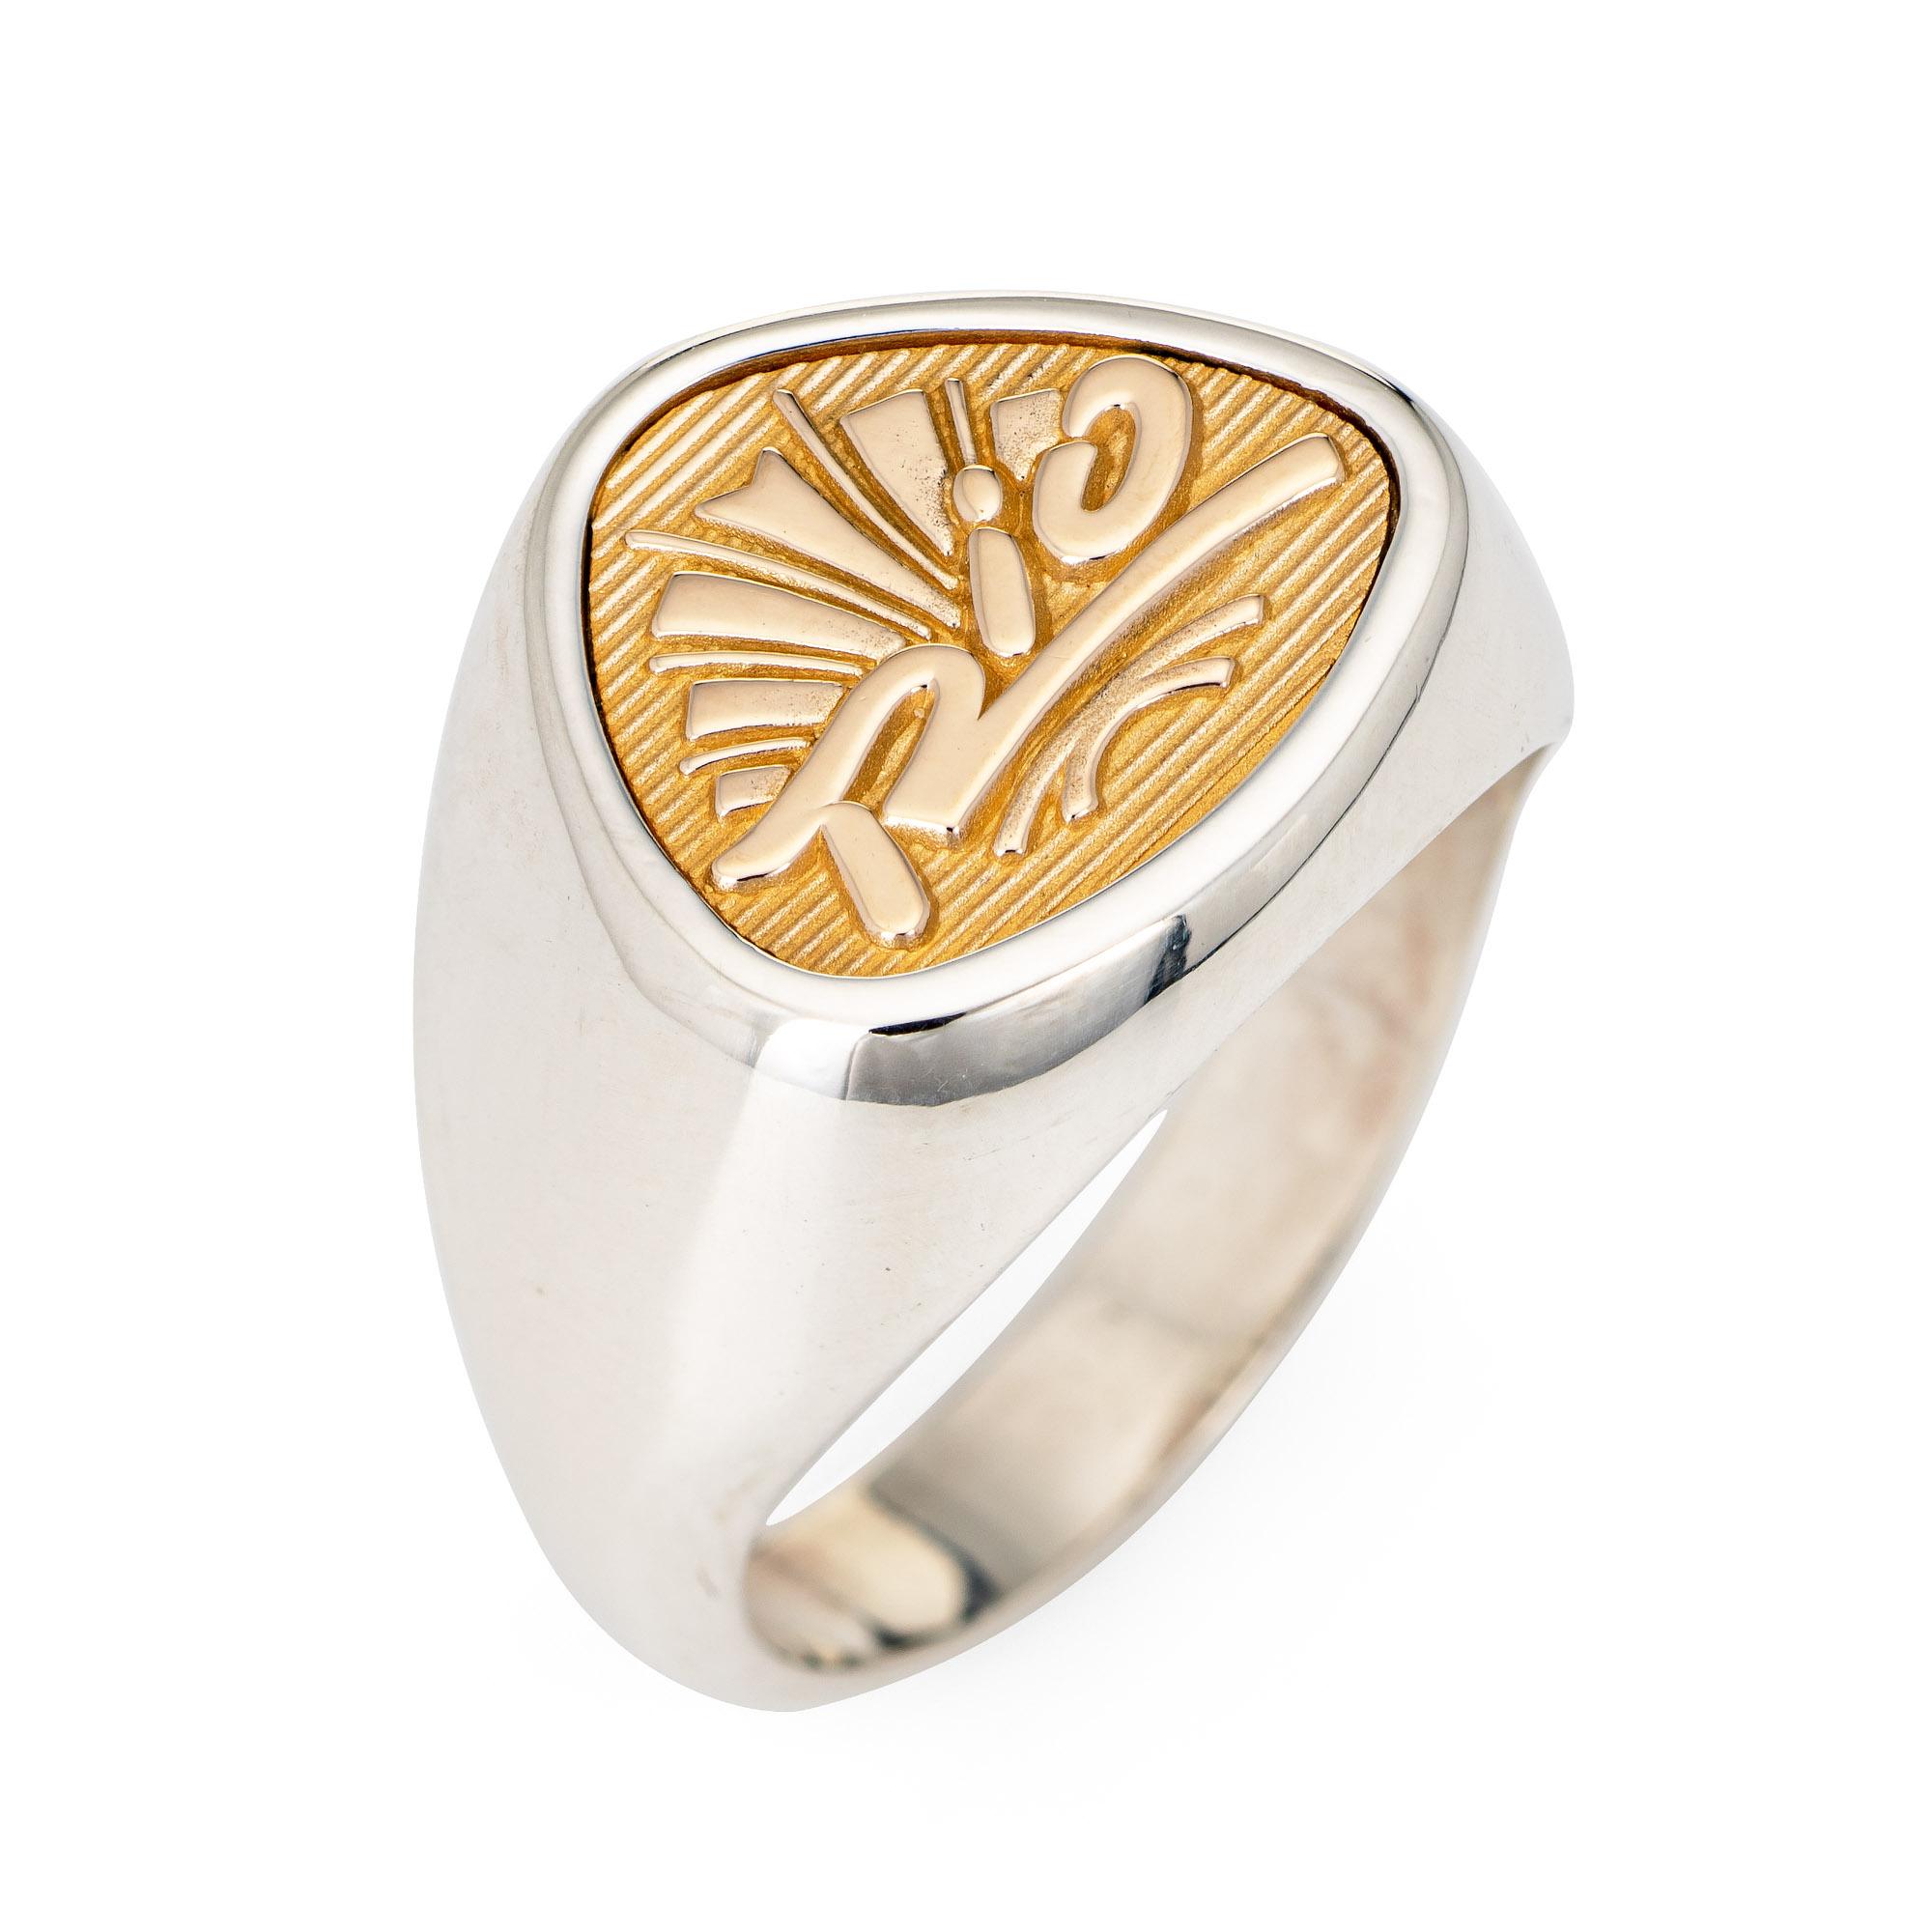 Unique vintage Rio Hotel signet ring crafted in sterling silver and 10k yellow gold. 

The Rio Hotel of Las Vegas emblem is depicted in 10k yellow gold and set flush into a sterling silver mount. The ring dates to 1994 and is engraved 